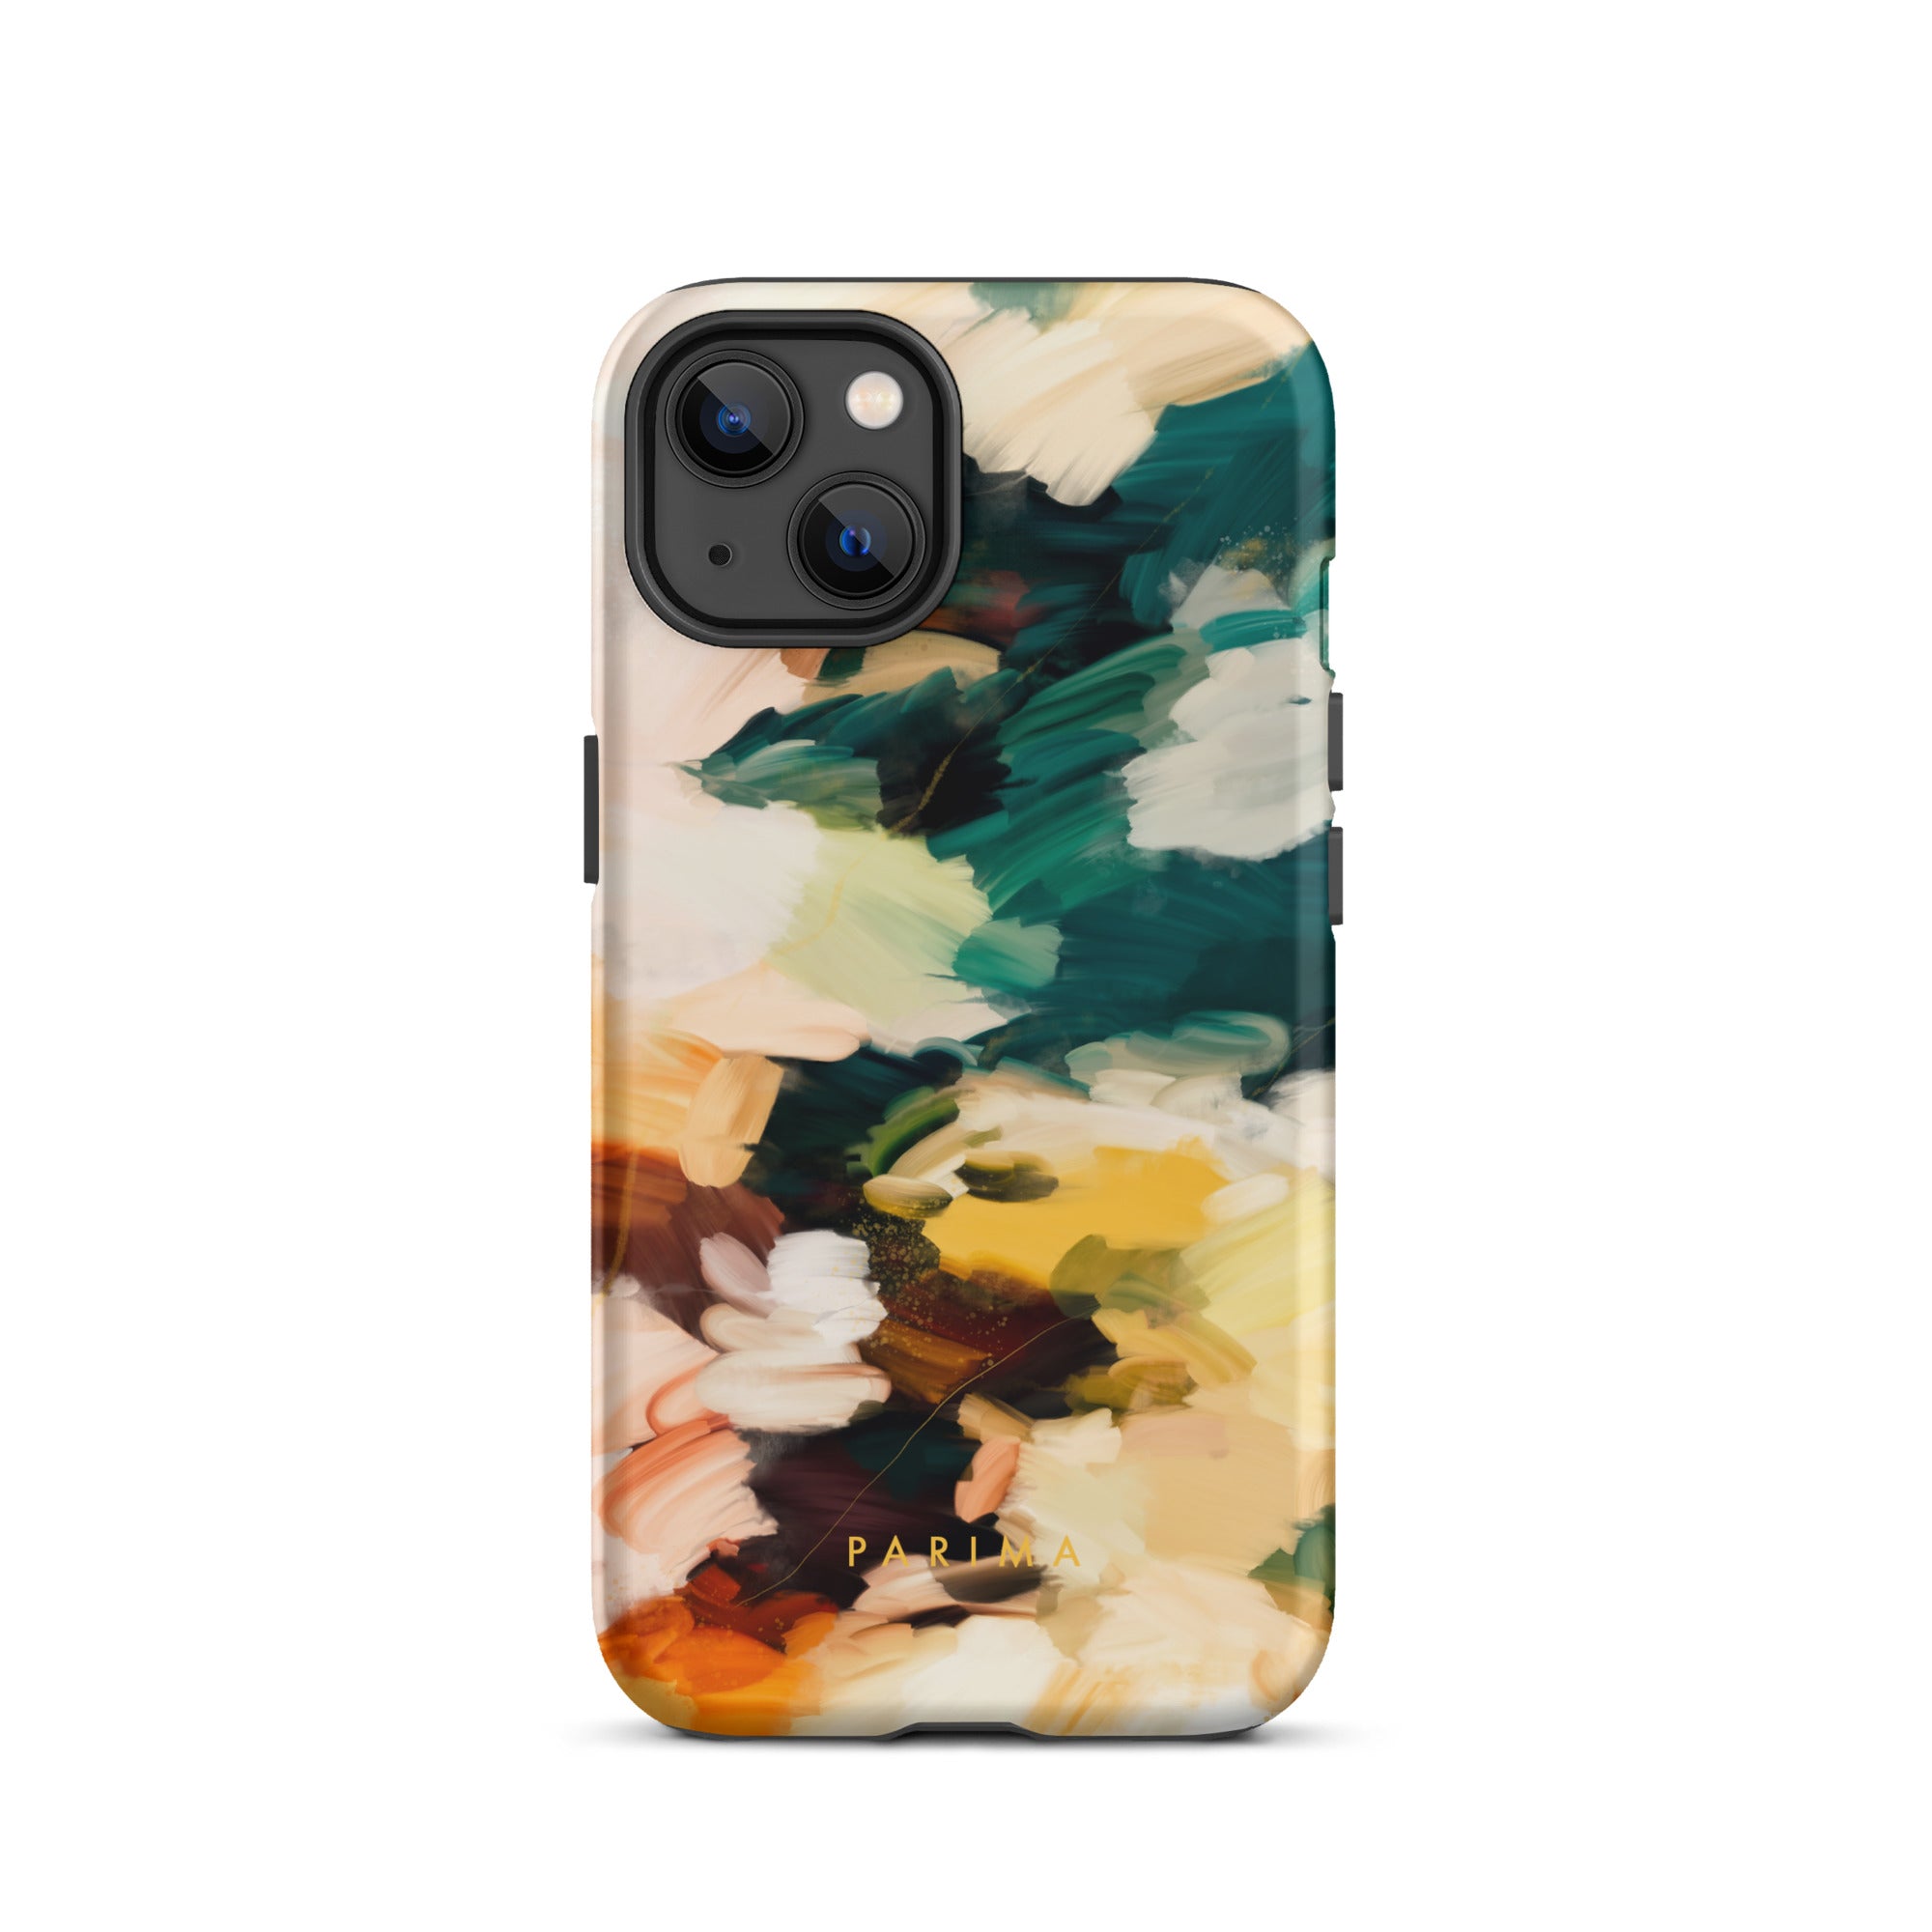 Cinque Terre, green and yellow abstract art - iPhone 13 tough case by Parima Studio